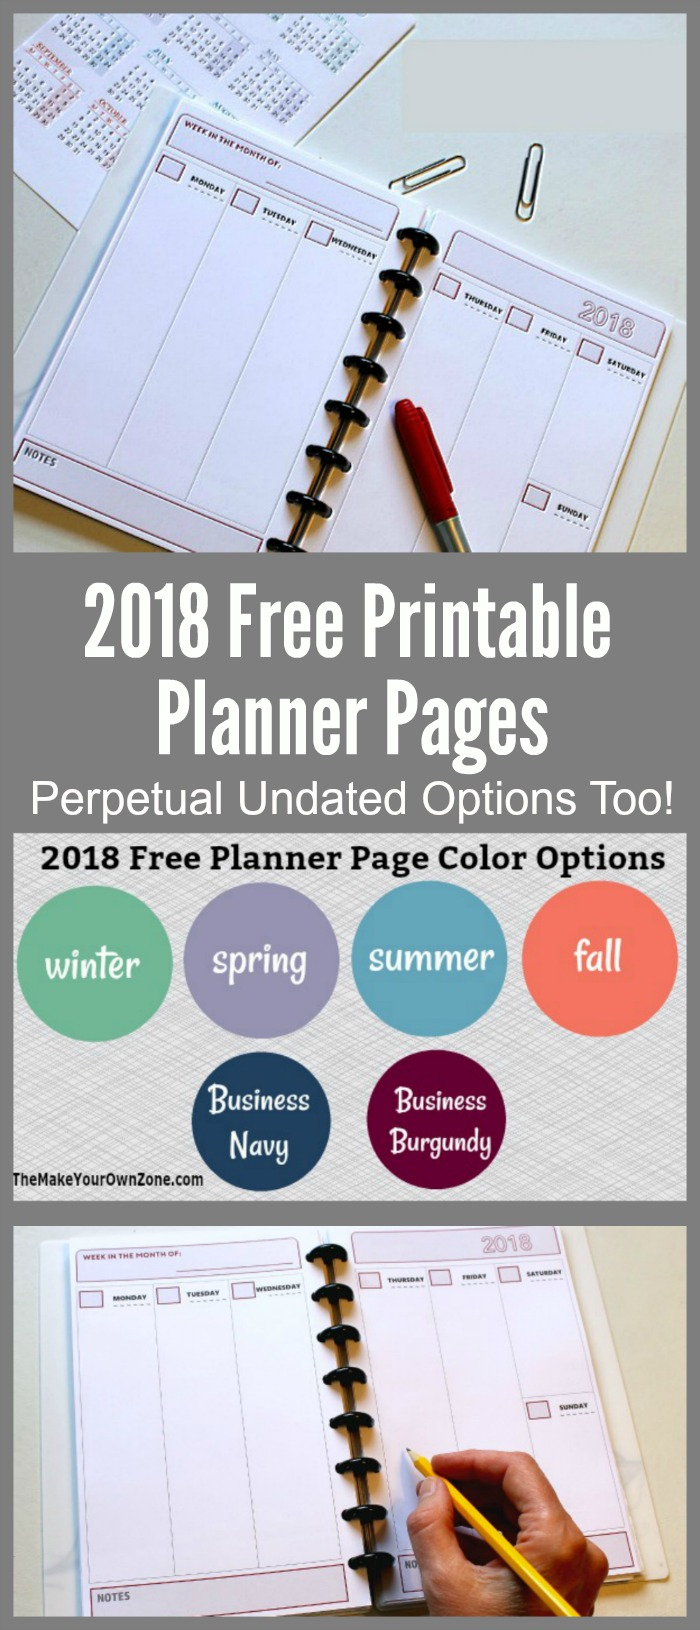 2018 Free Printable Planner Pages - The Make Your Own Zone - Free Printable 5.5 X8 5 Planner Pages